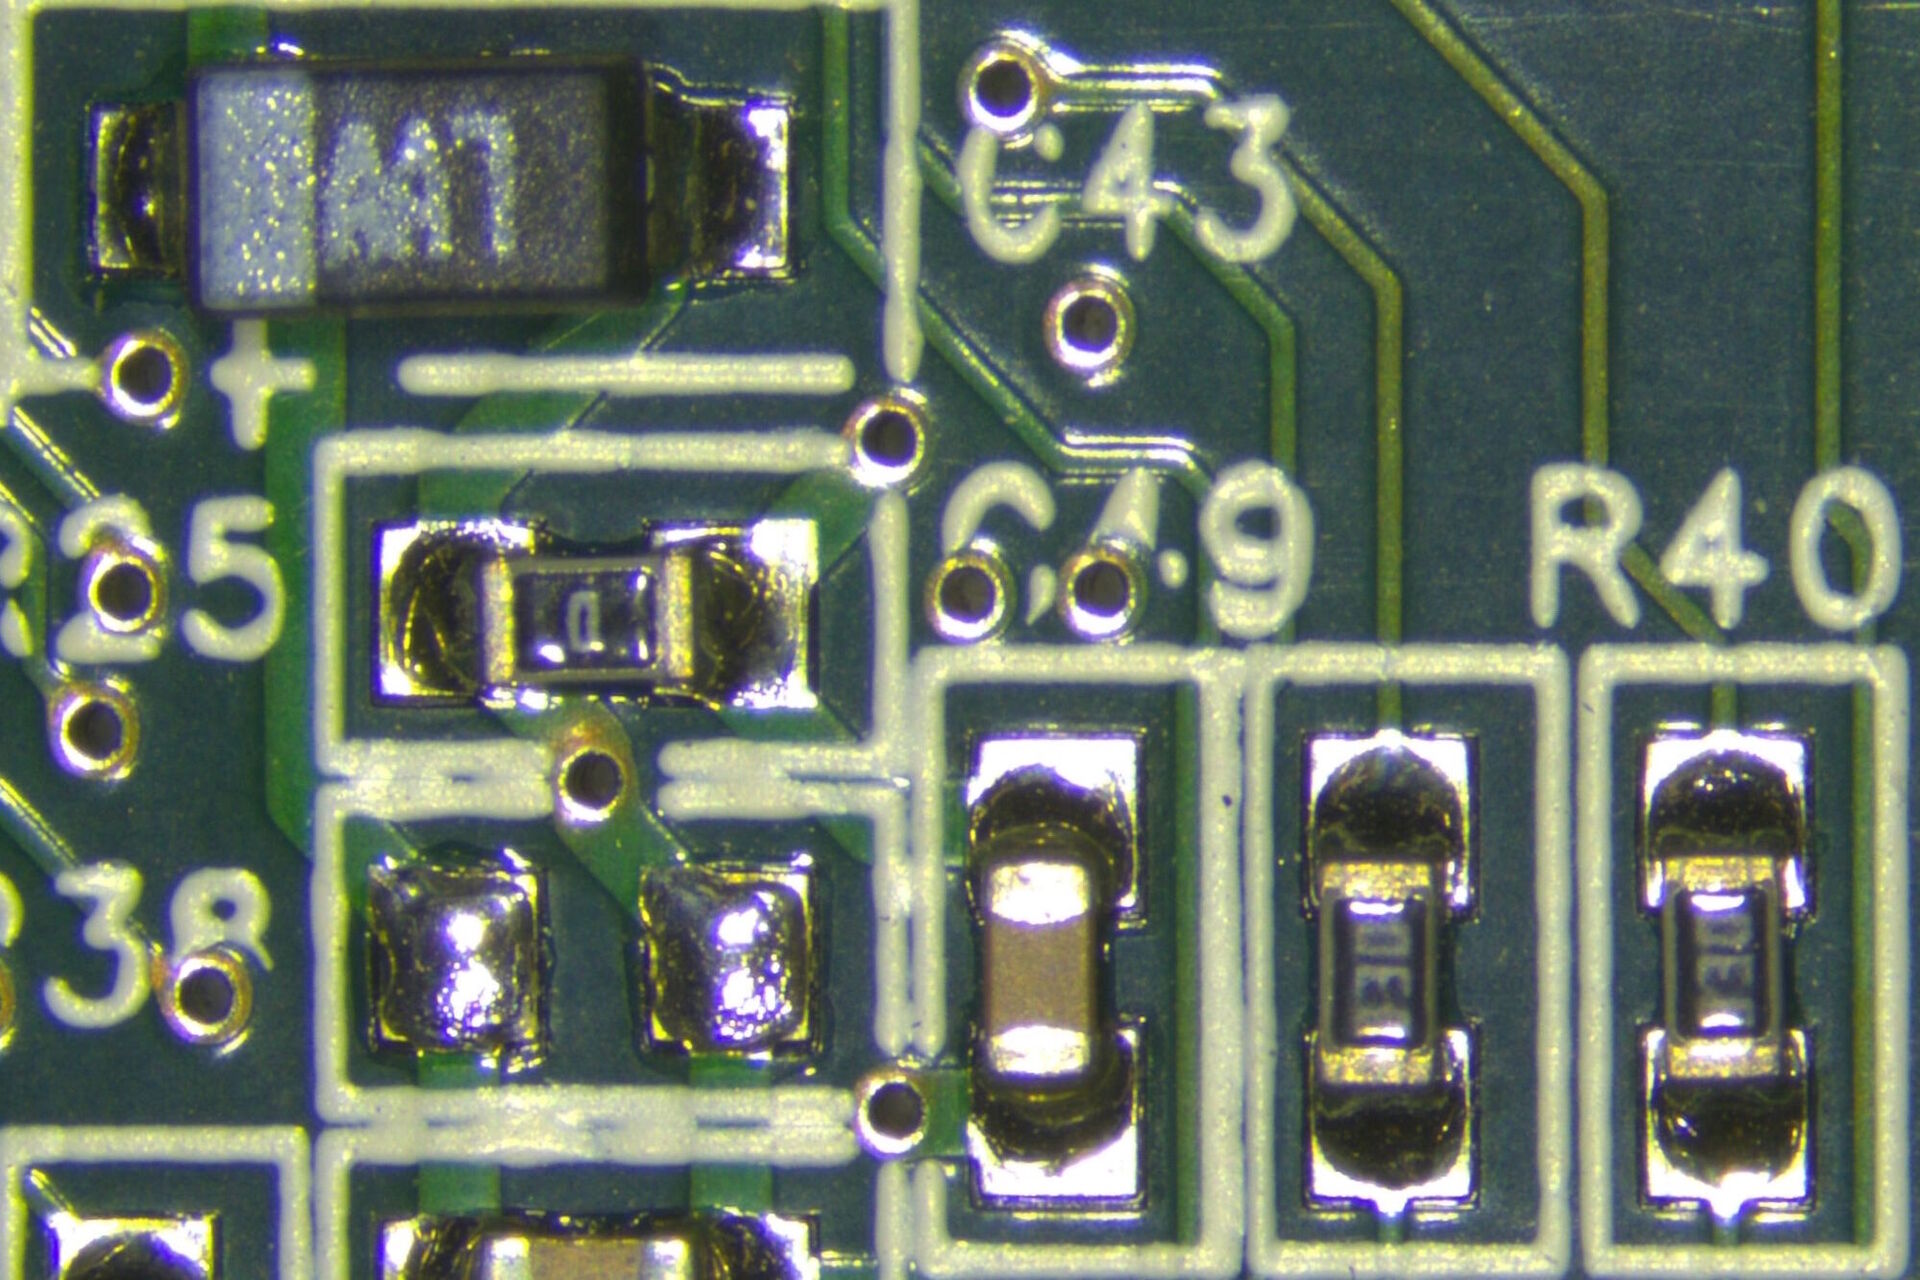 [Translate to chinese:] Printed Circuit Board (PCB) - Near Vertical Illumination (NVI): Holes and recesses